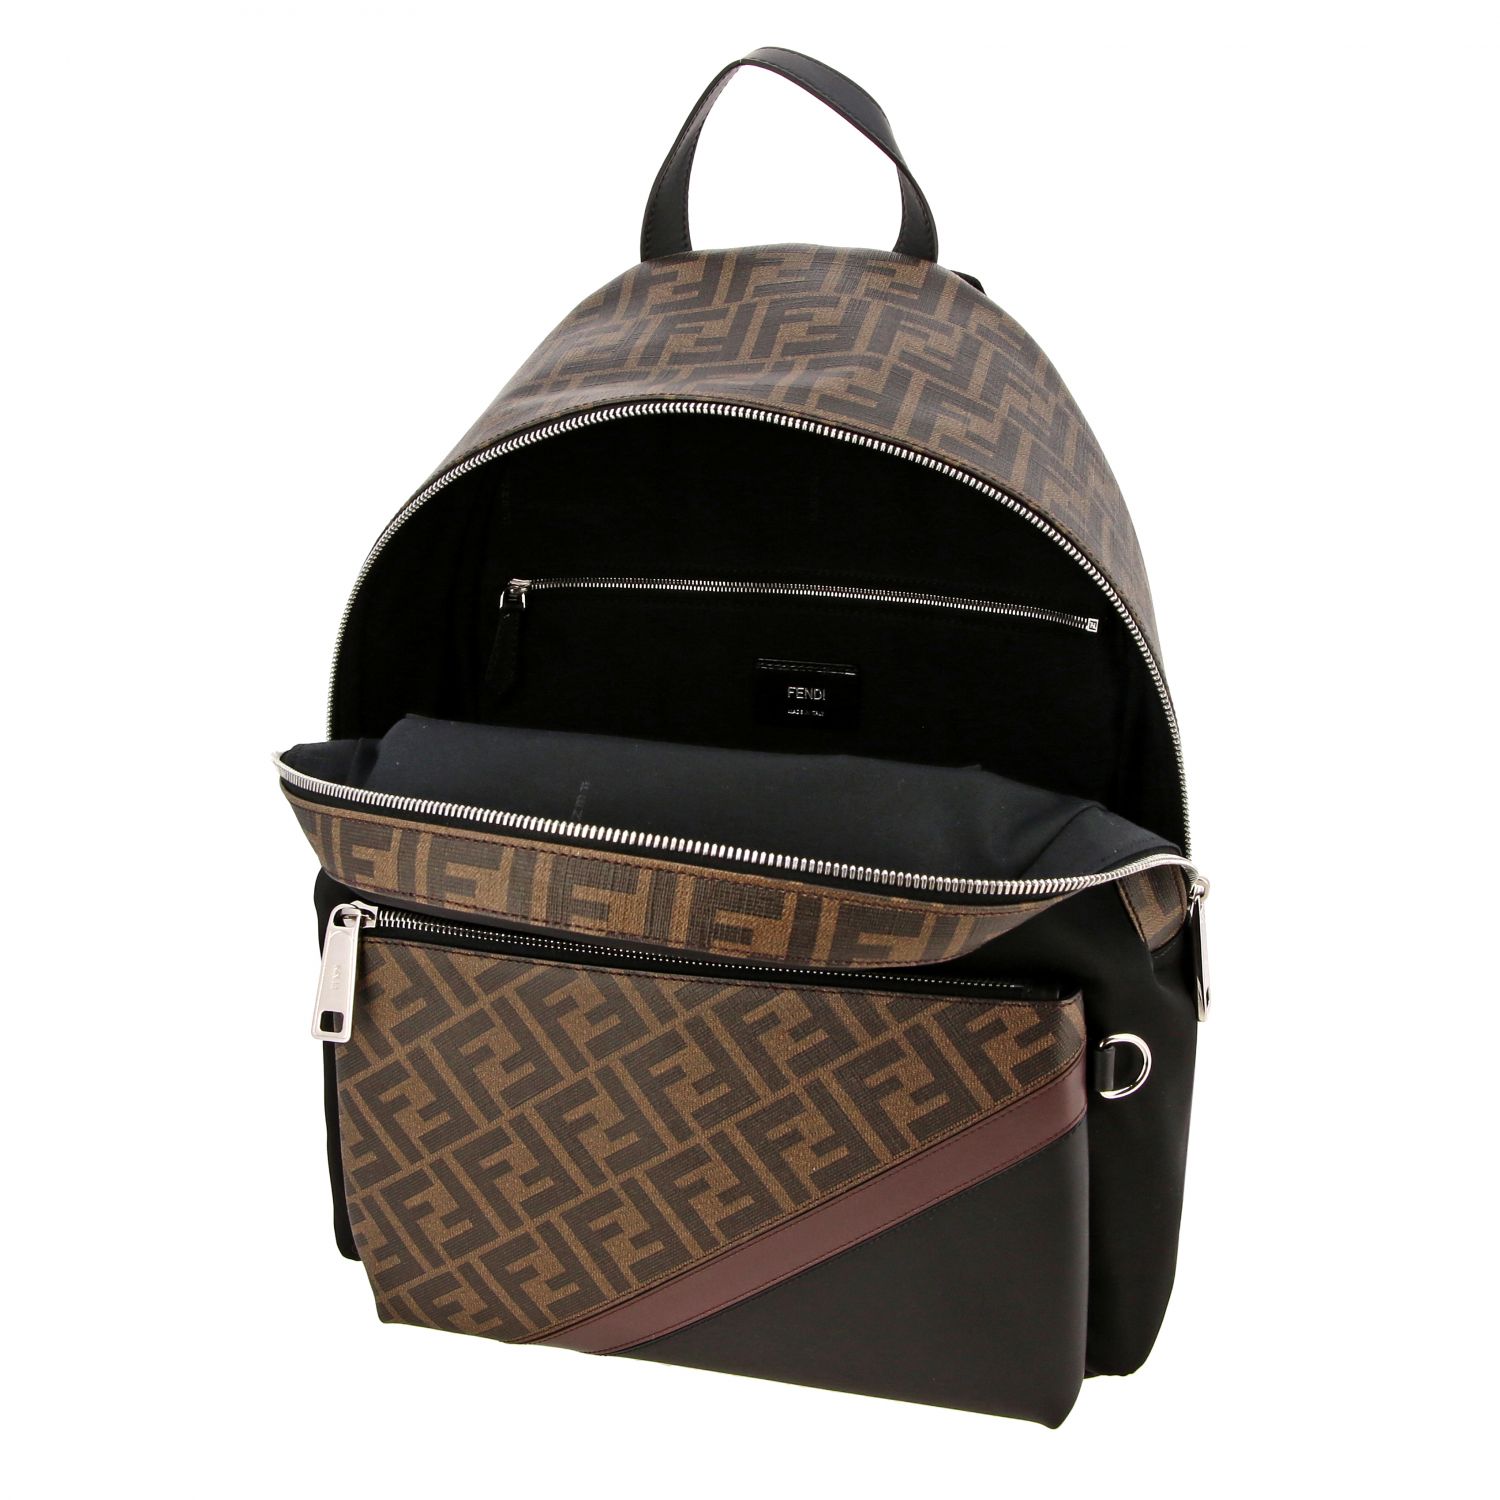 Fendi leather backpack with FF monogram and nylon